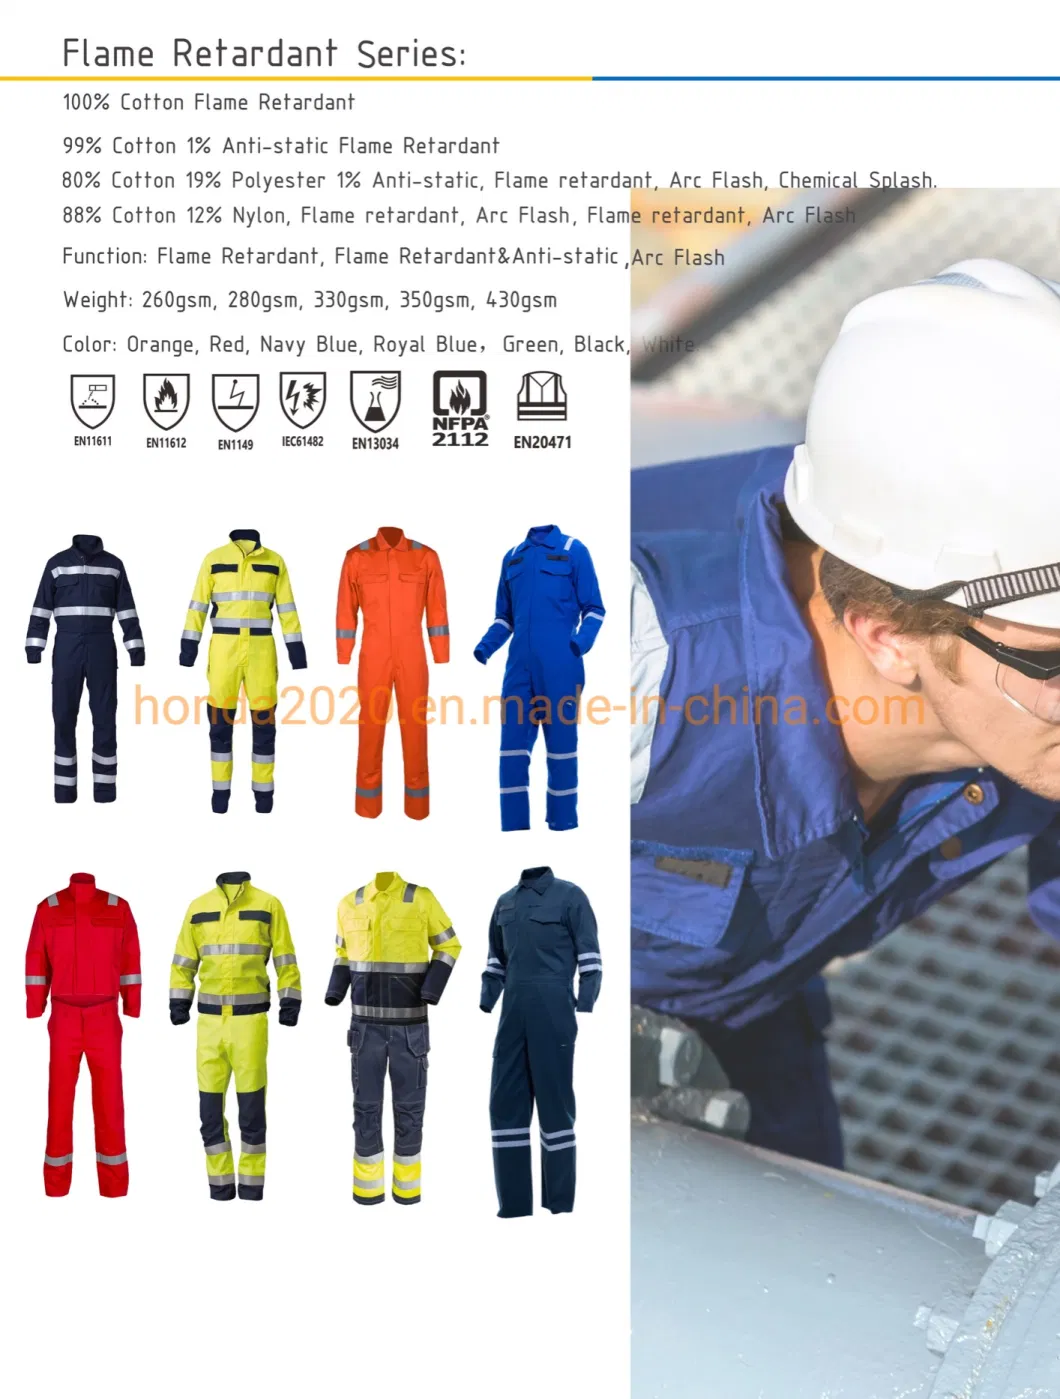 Classic Waterproof, Outdoor, Windproof Breathable Man High Visibility Reflective Popular Winter Safety Jacket Work Wear